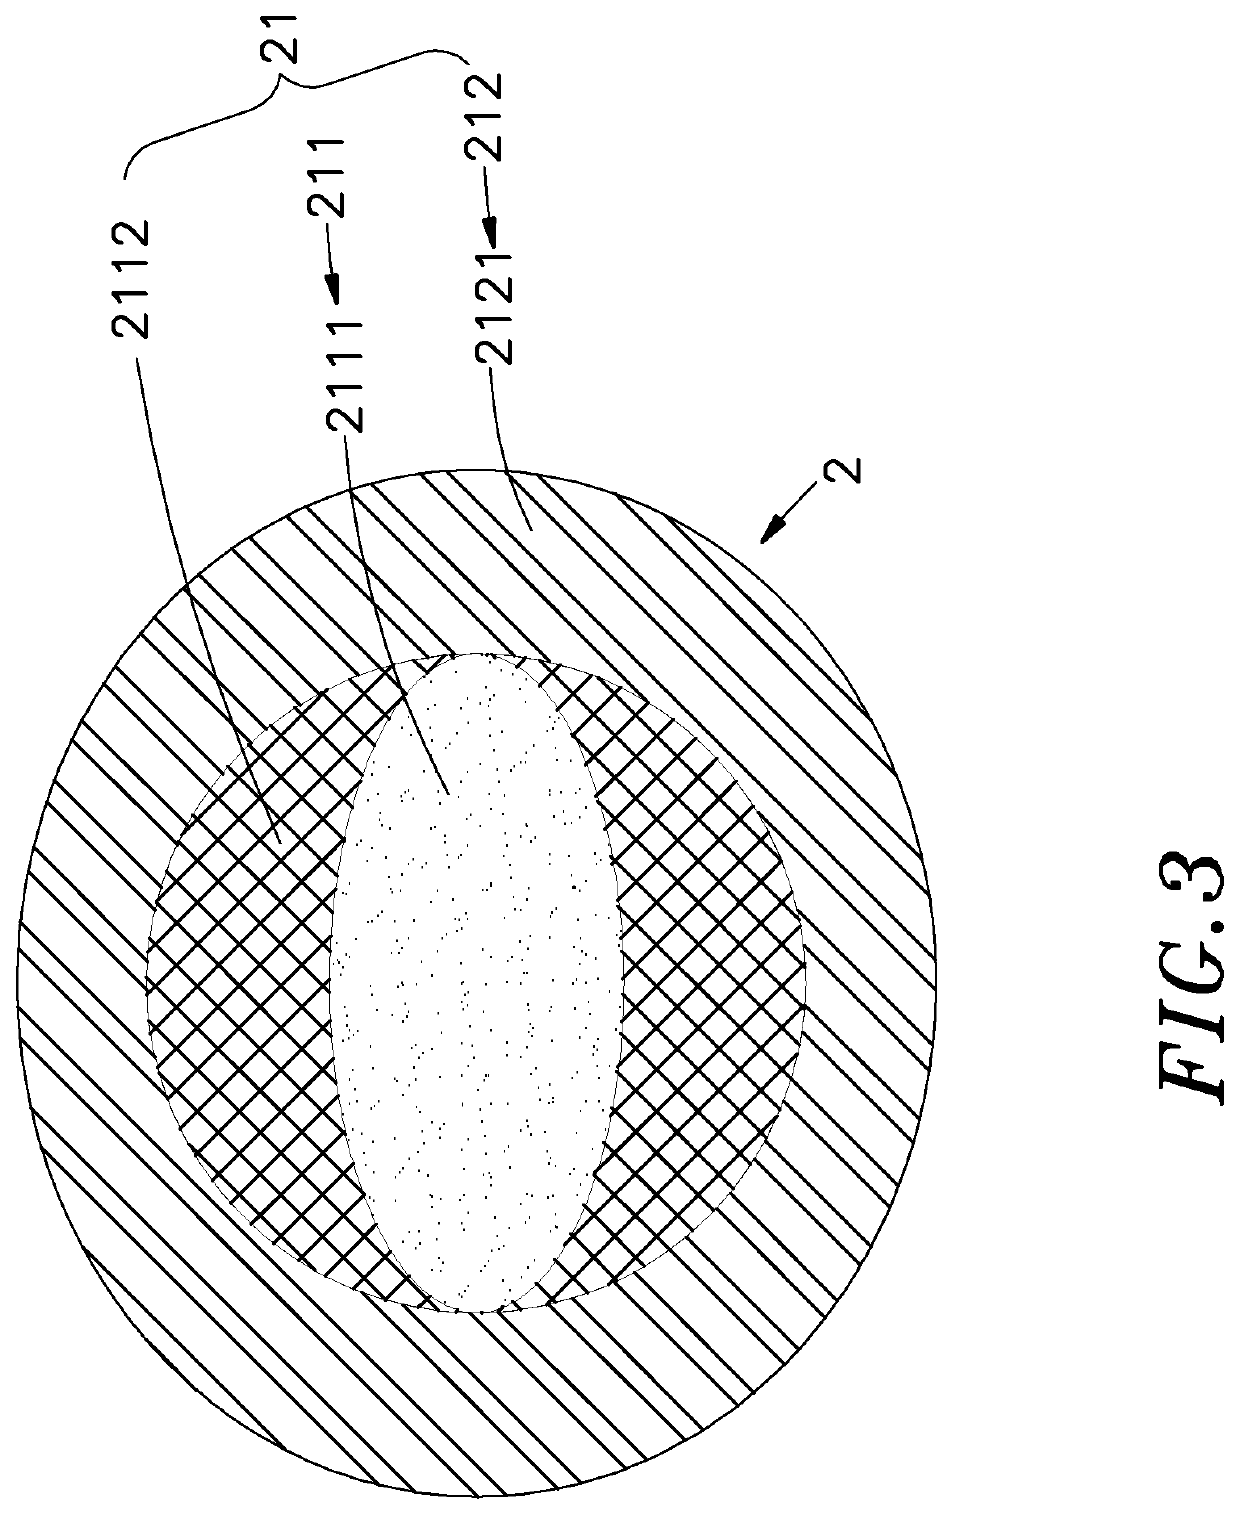 Lens with asymmetric optical zone to increase defocus image area